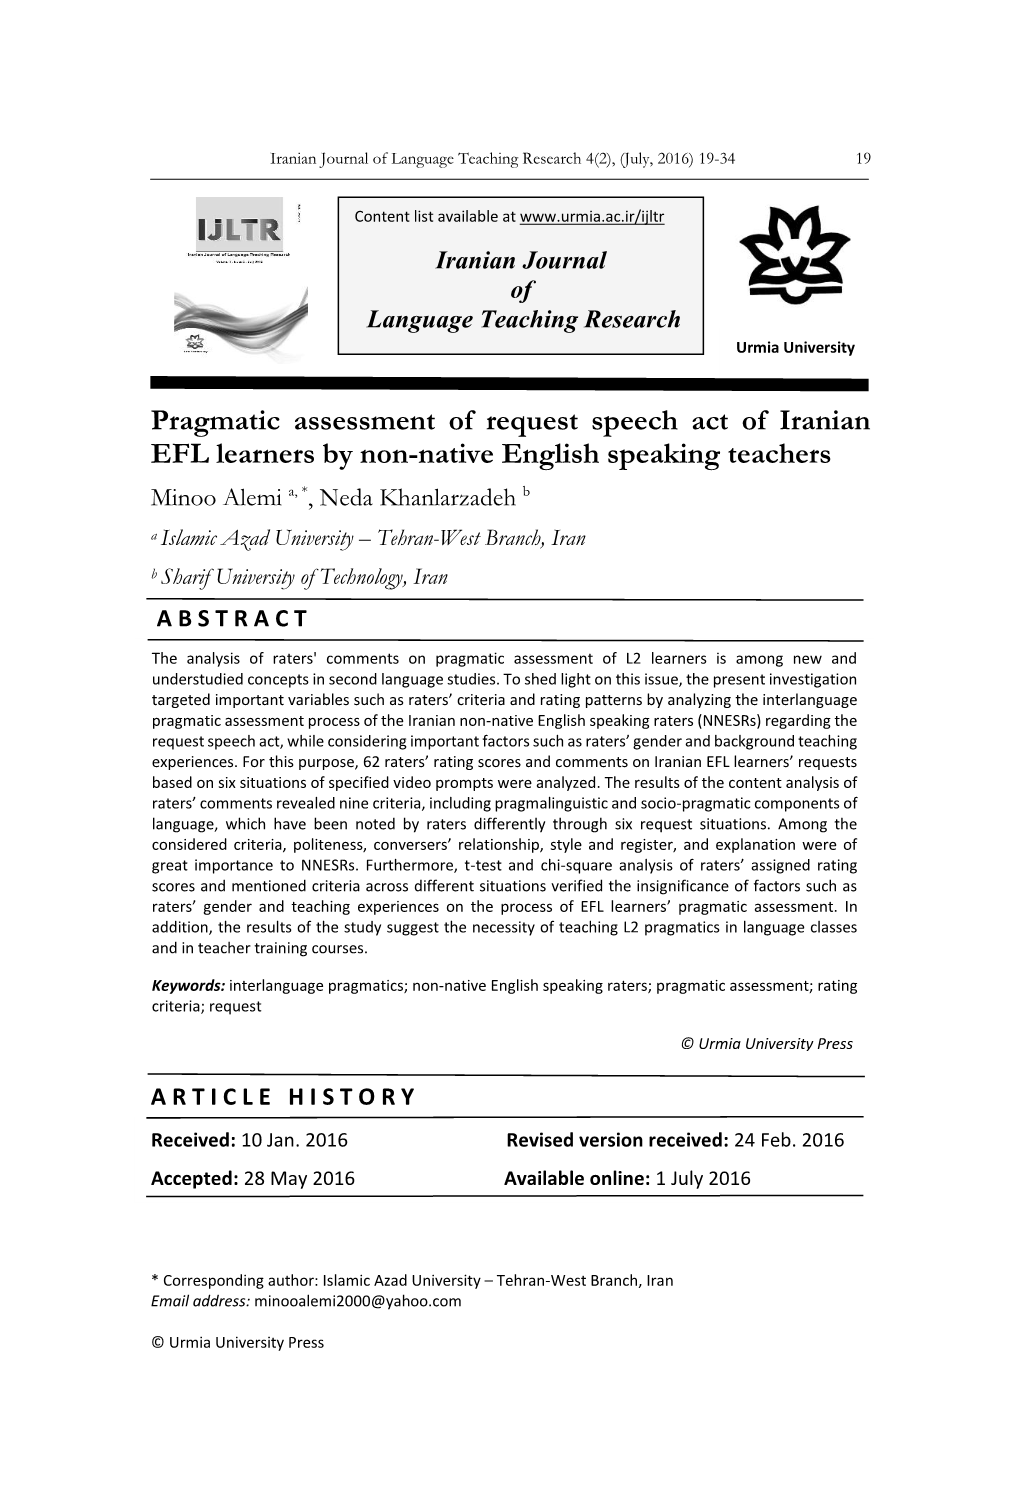 Pragmatic Assessment of Request Speech Act of Iranian EFL Learners